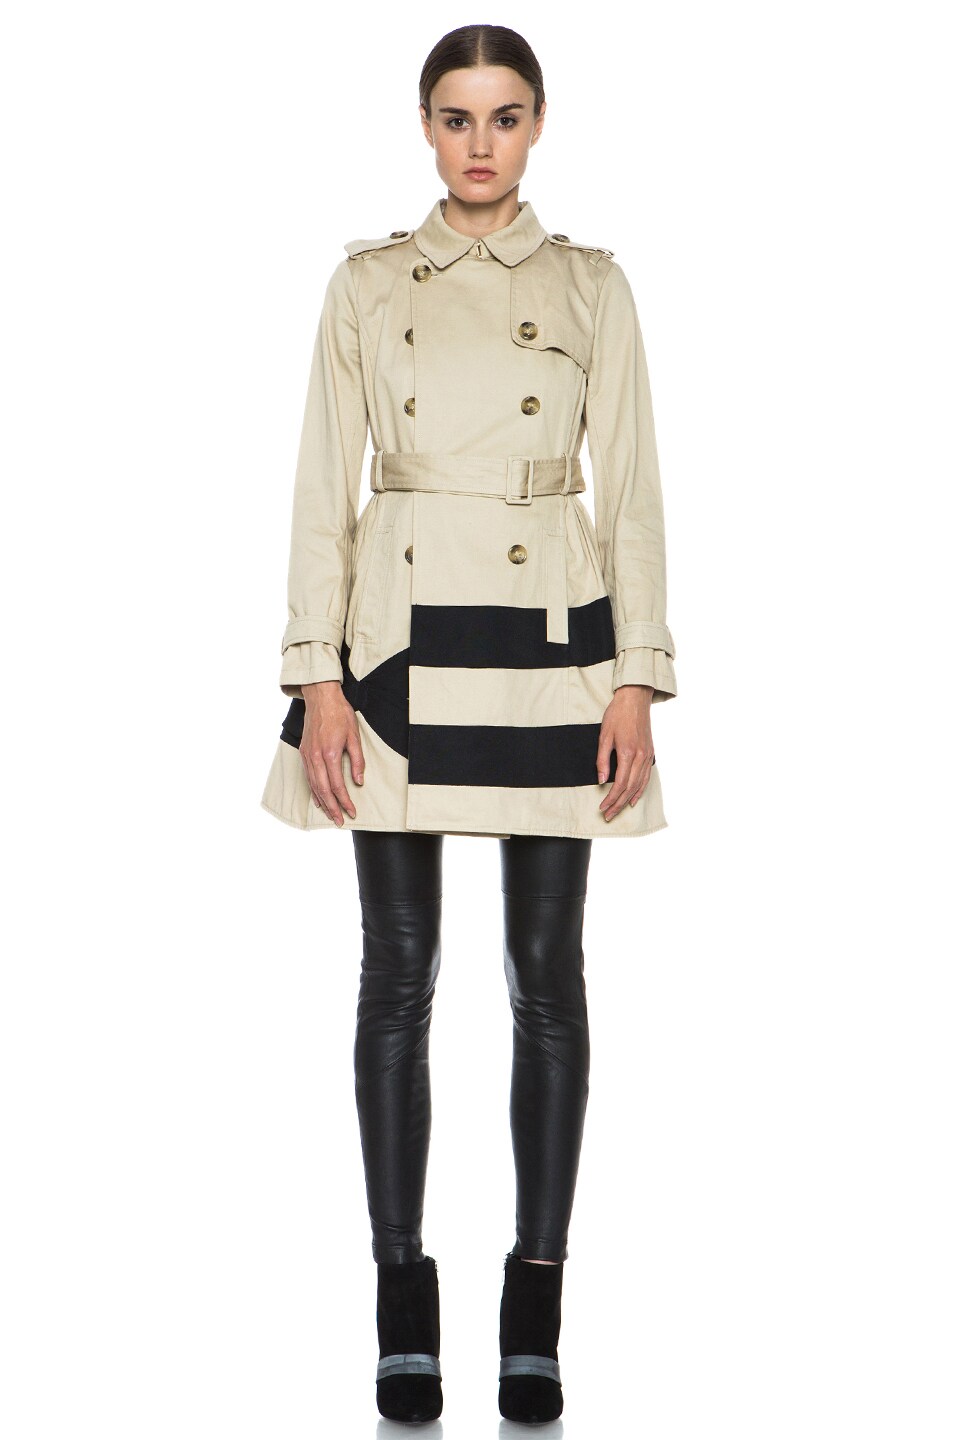 Red Valentino A-Line Cotton Trench Coat in Khaki | FWRD